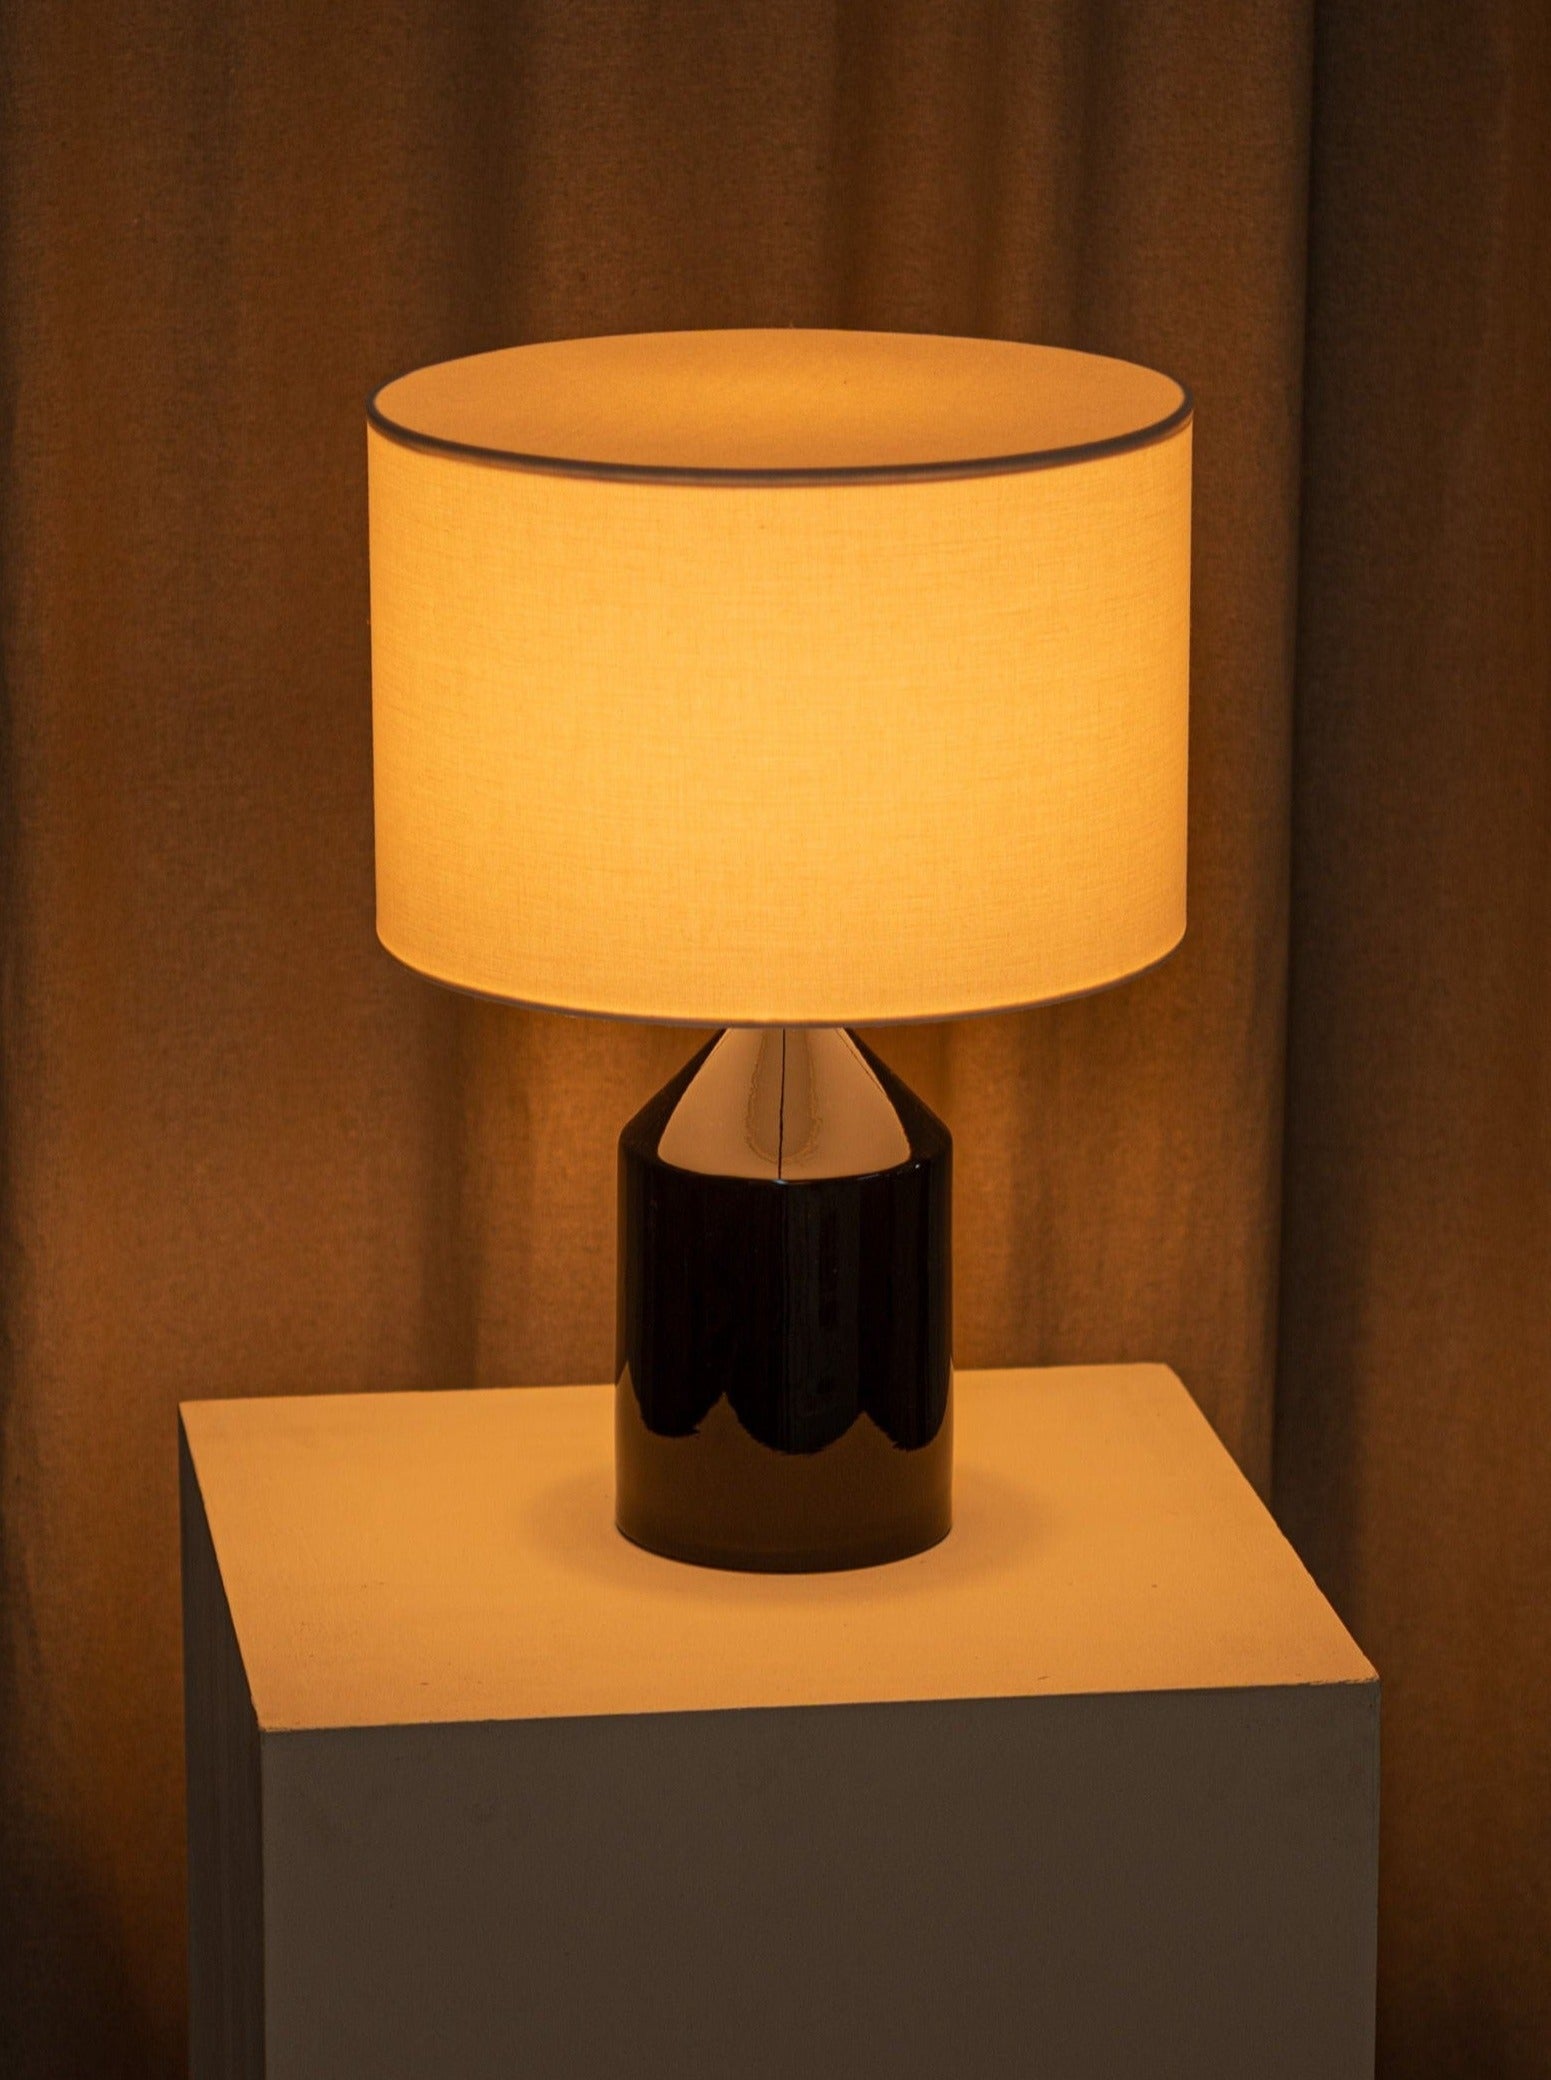 A warmly lit Simone & Marcel Josef Black Ceramic table lamp with a cotton drum lampshade, casting a soft glow on a draped beige curtain background. The lamp's base is glossy, dark, and partially reflective, standing on a